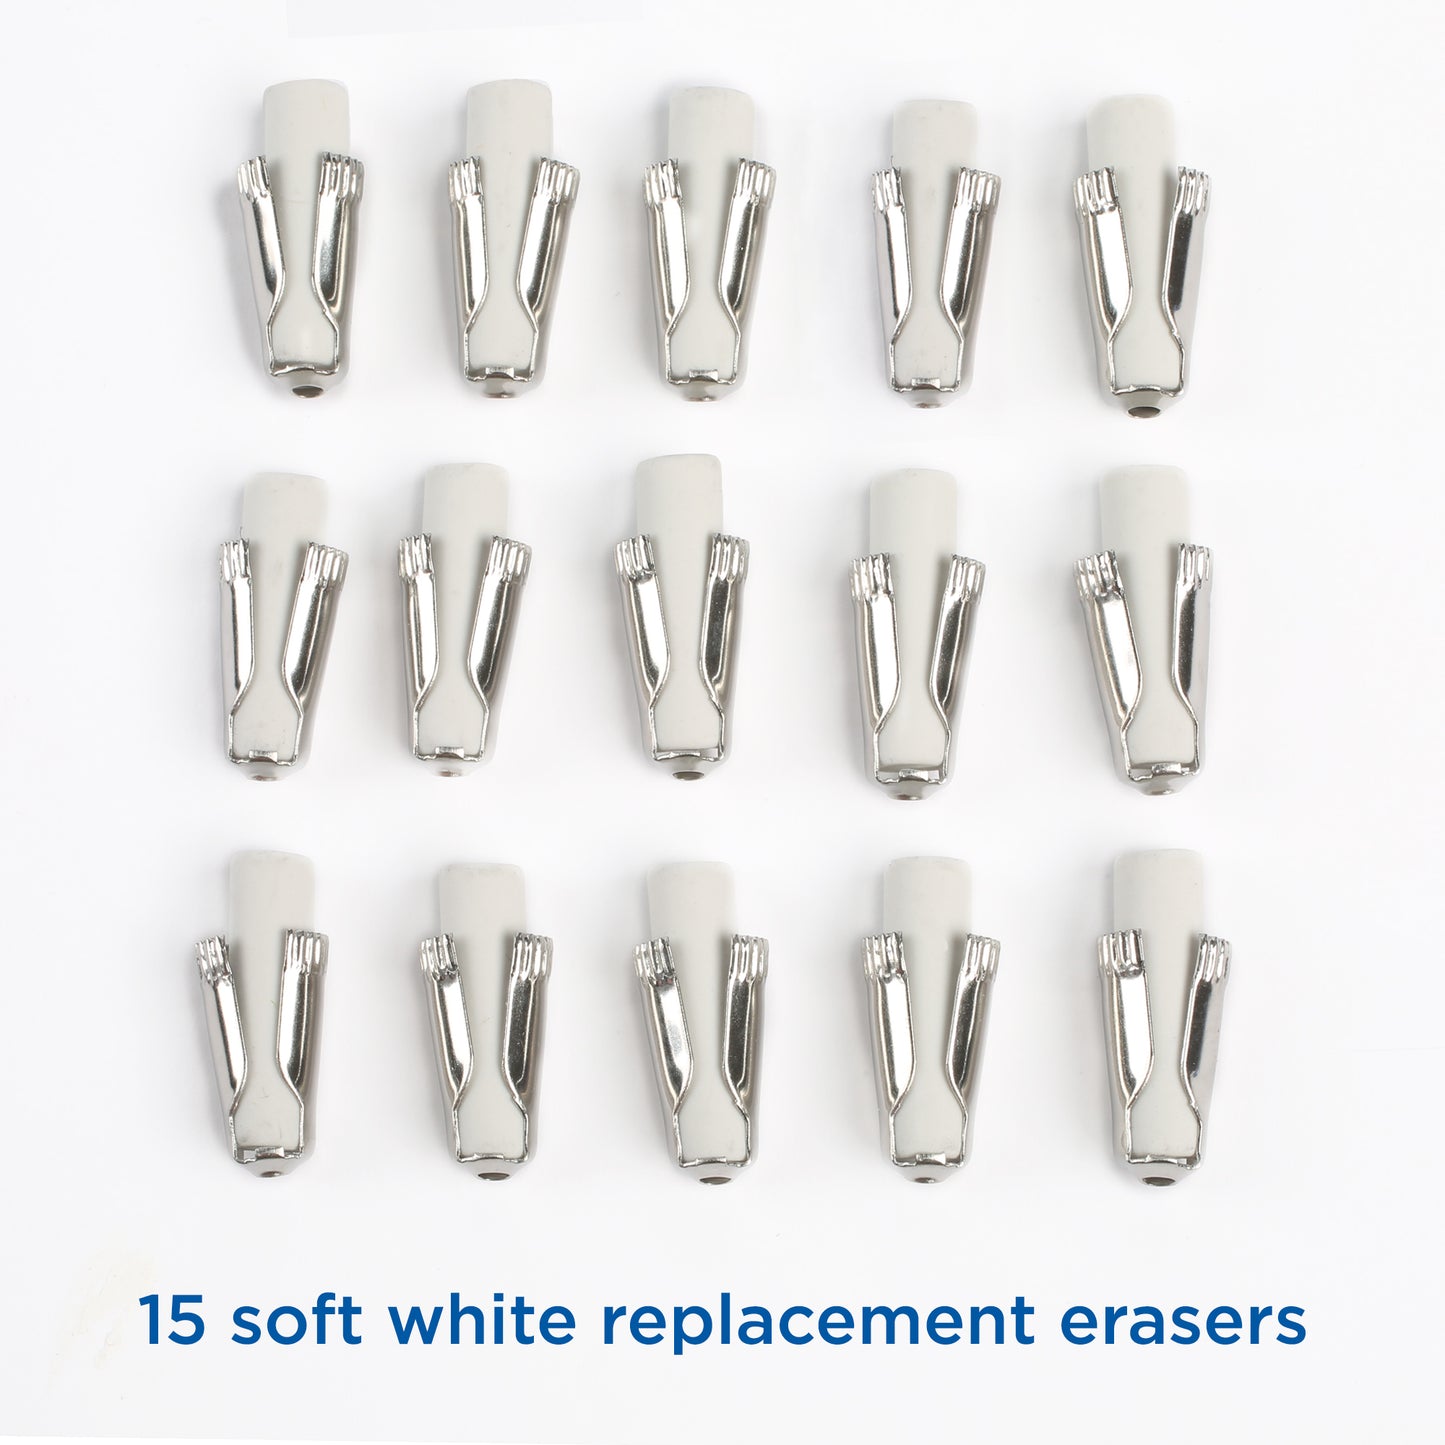 Soft White Eraser Replacements: Pack of 15